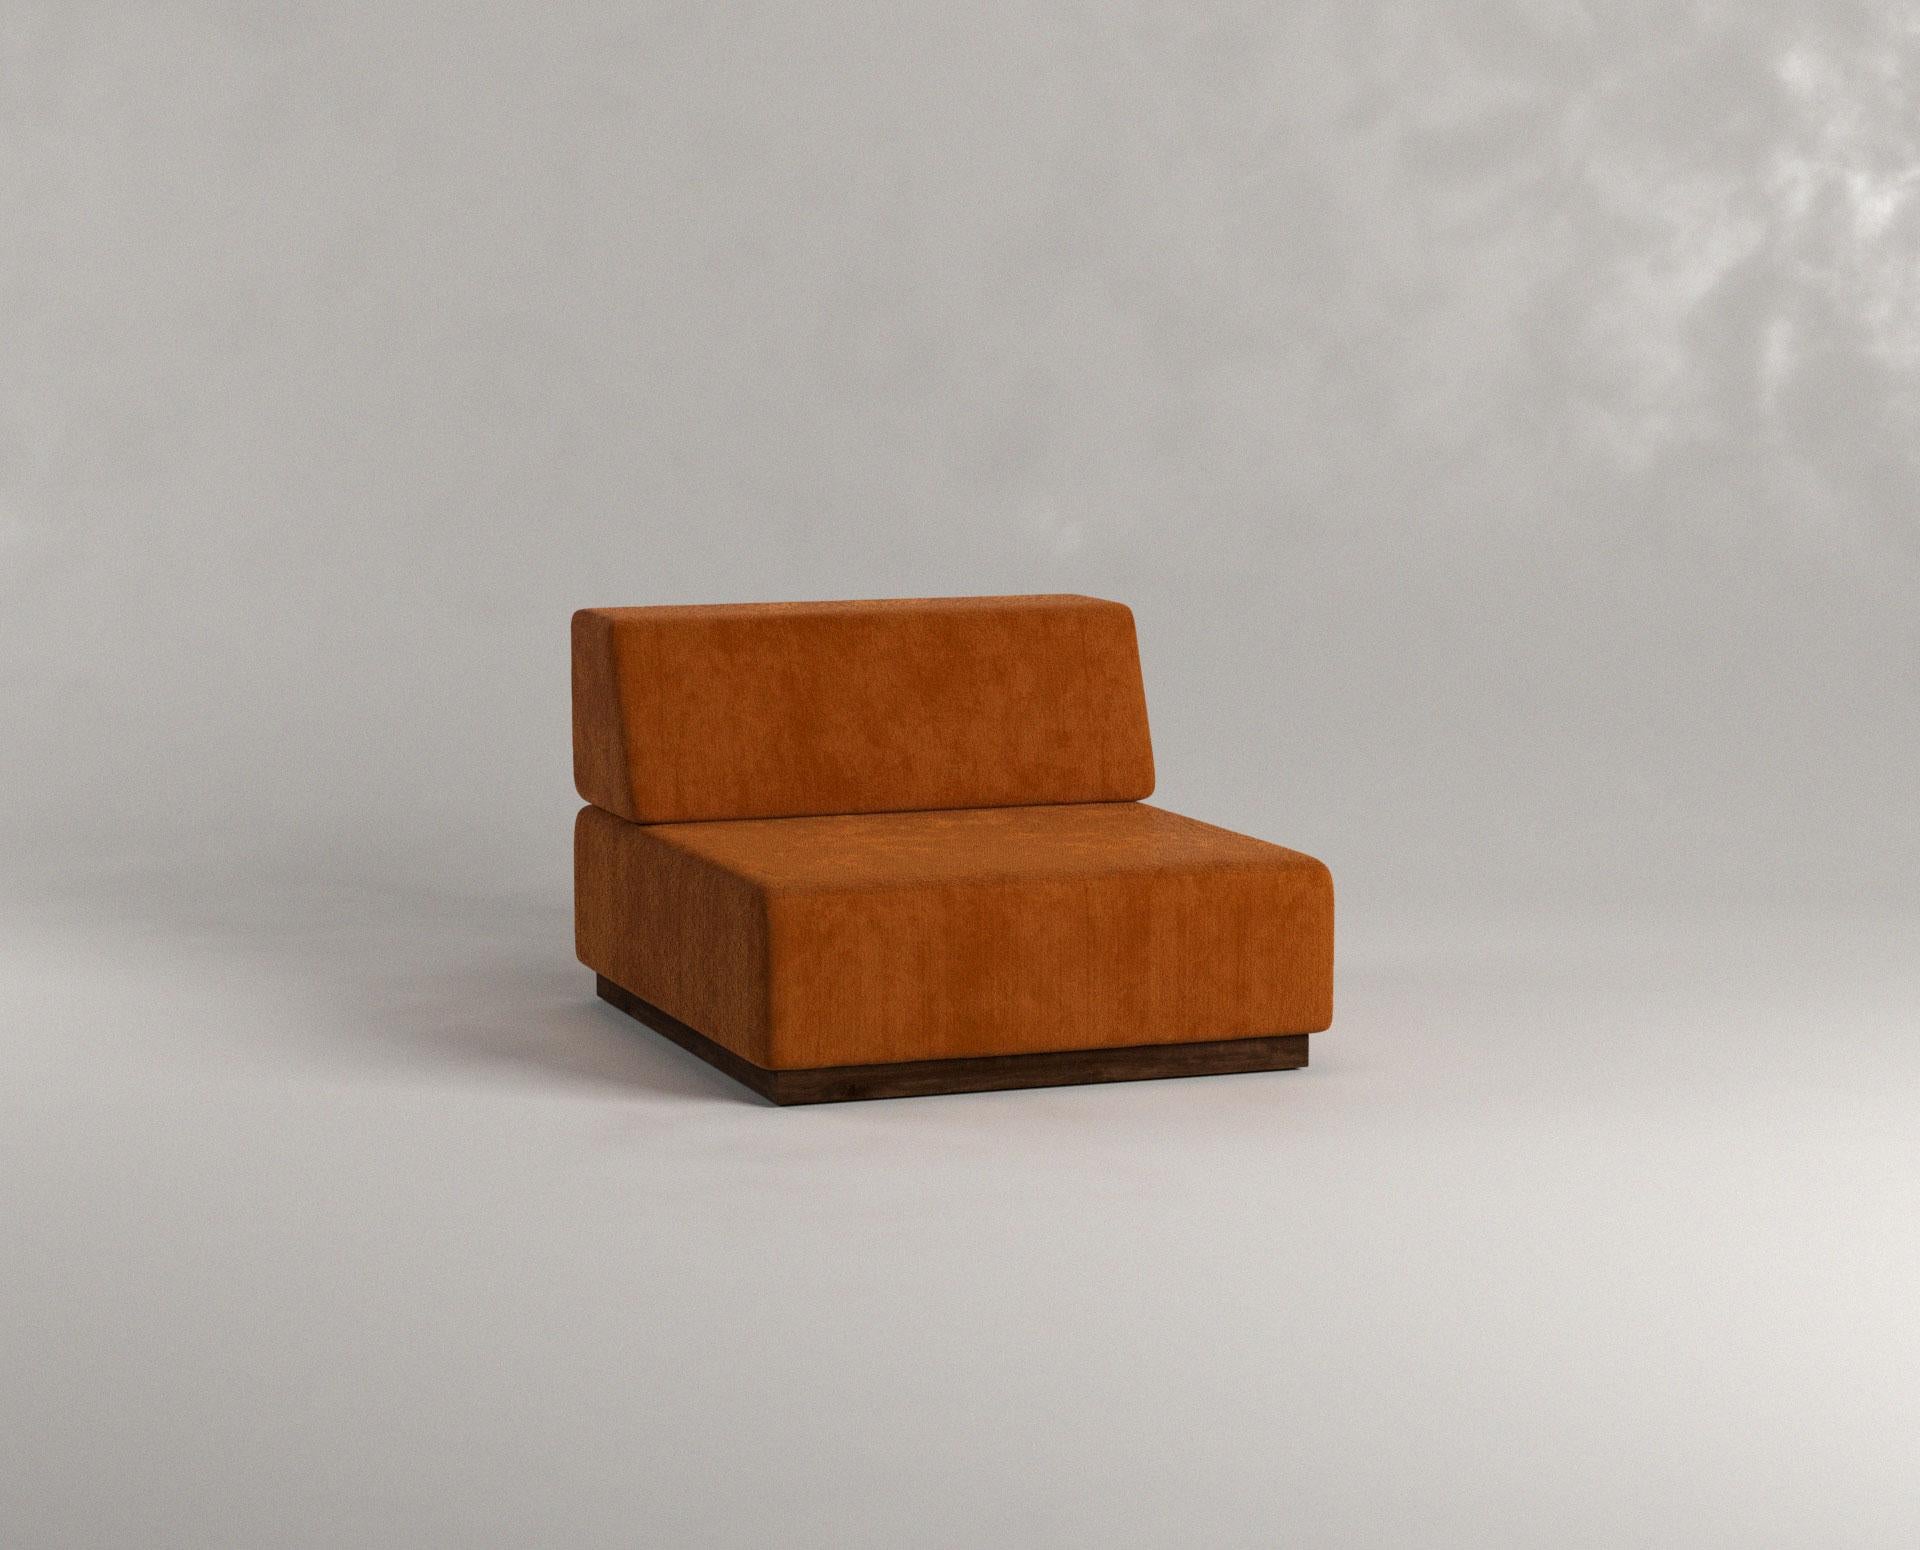 Dune Nube Lounger by Siete Studio
Dimensions: D100 x W80 x H60 cm.
Materials: Walnut, cushions, upholstery.

Characterised by its round edges and soft white cushions, Nube carries the comforting sensation of falling into a cloud.
The framework is